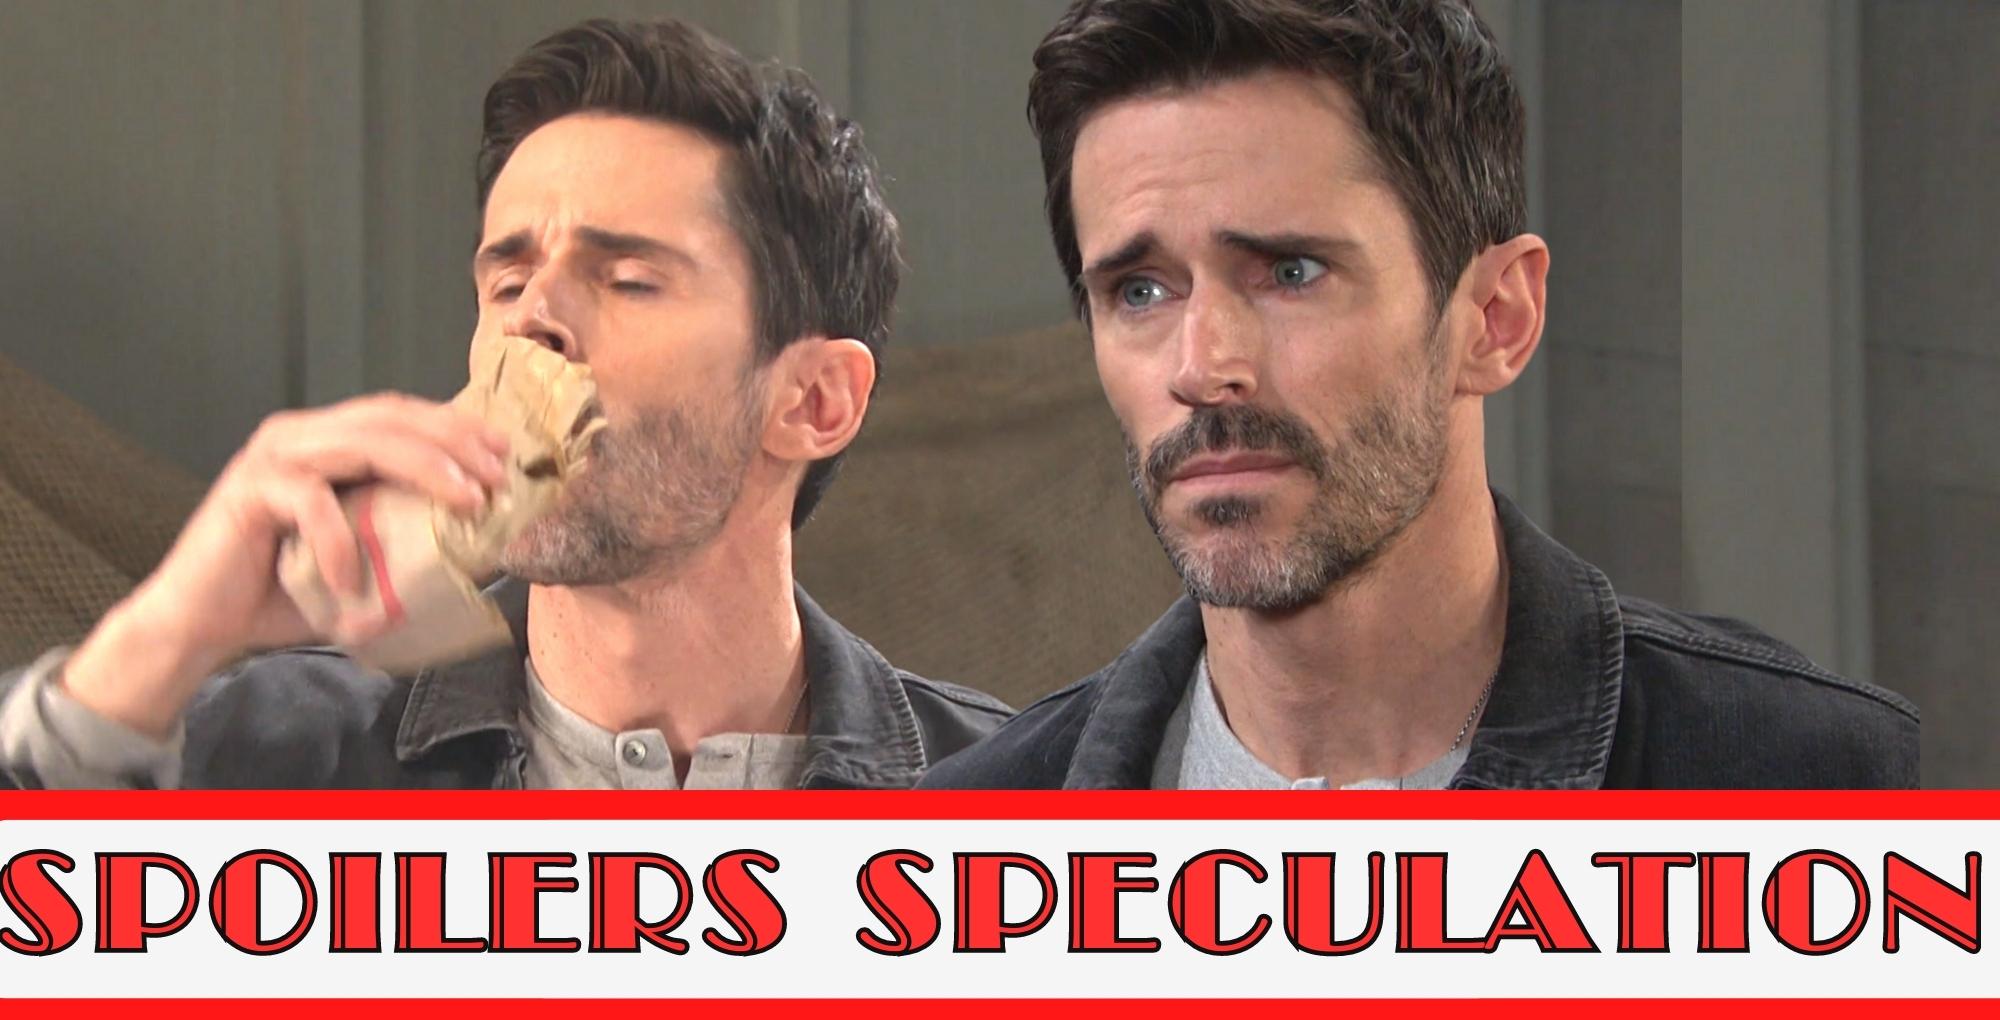 days spoilers speculation, double image of shawn drinking and looking sad.